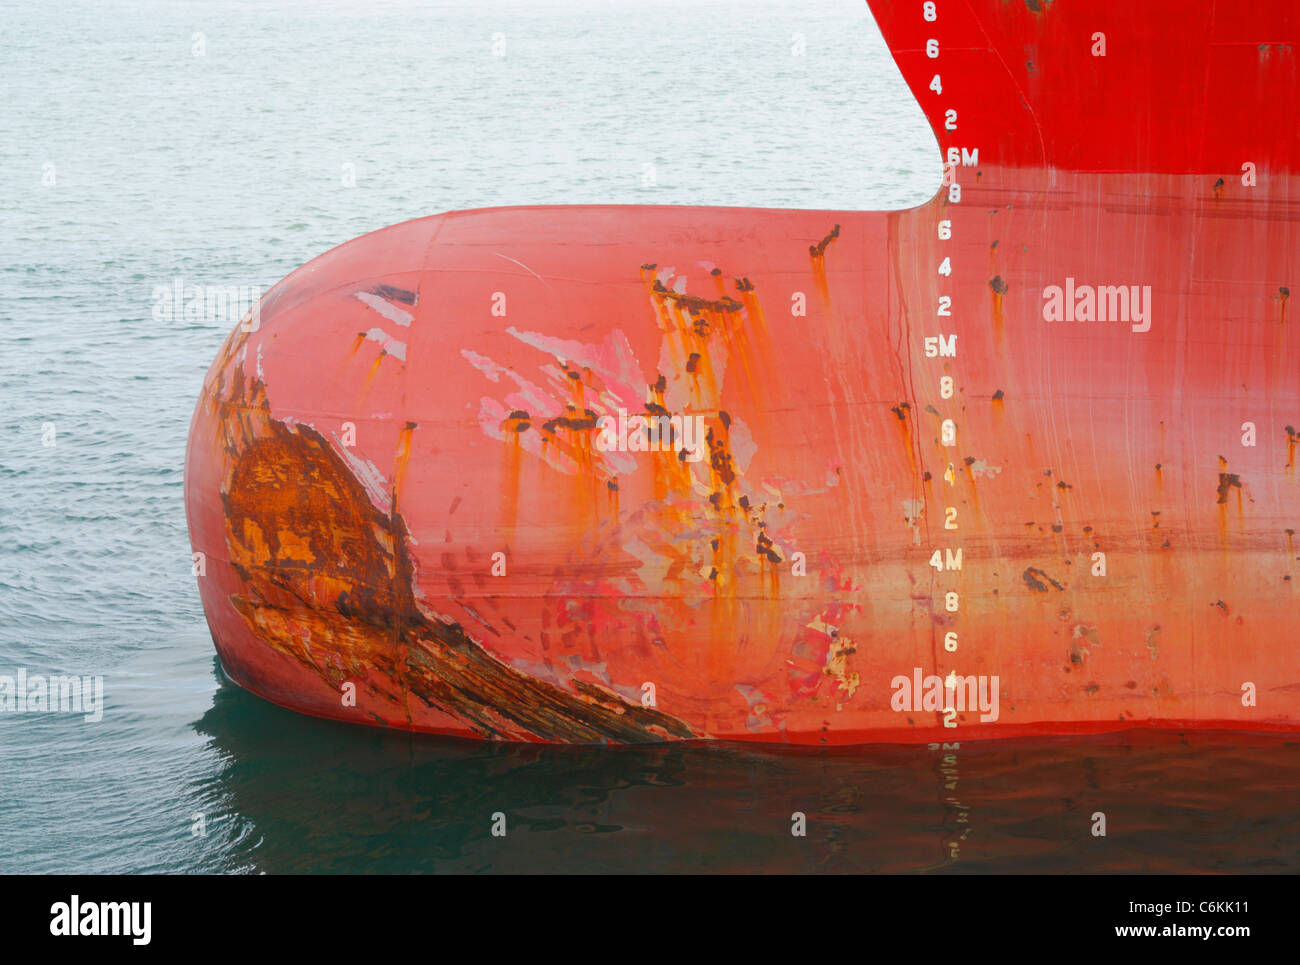 Sraped and dented bow of large merchant ship Stock Photo